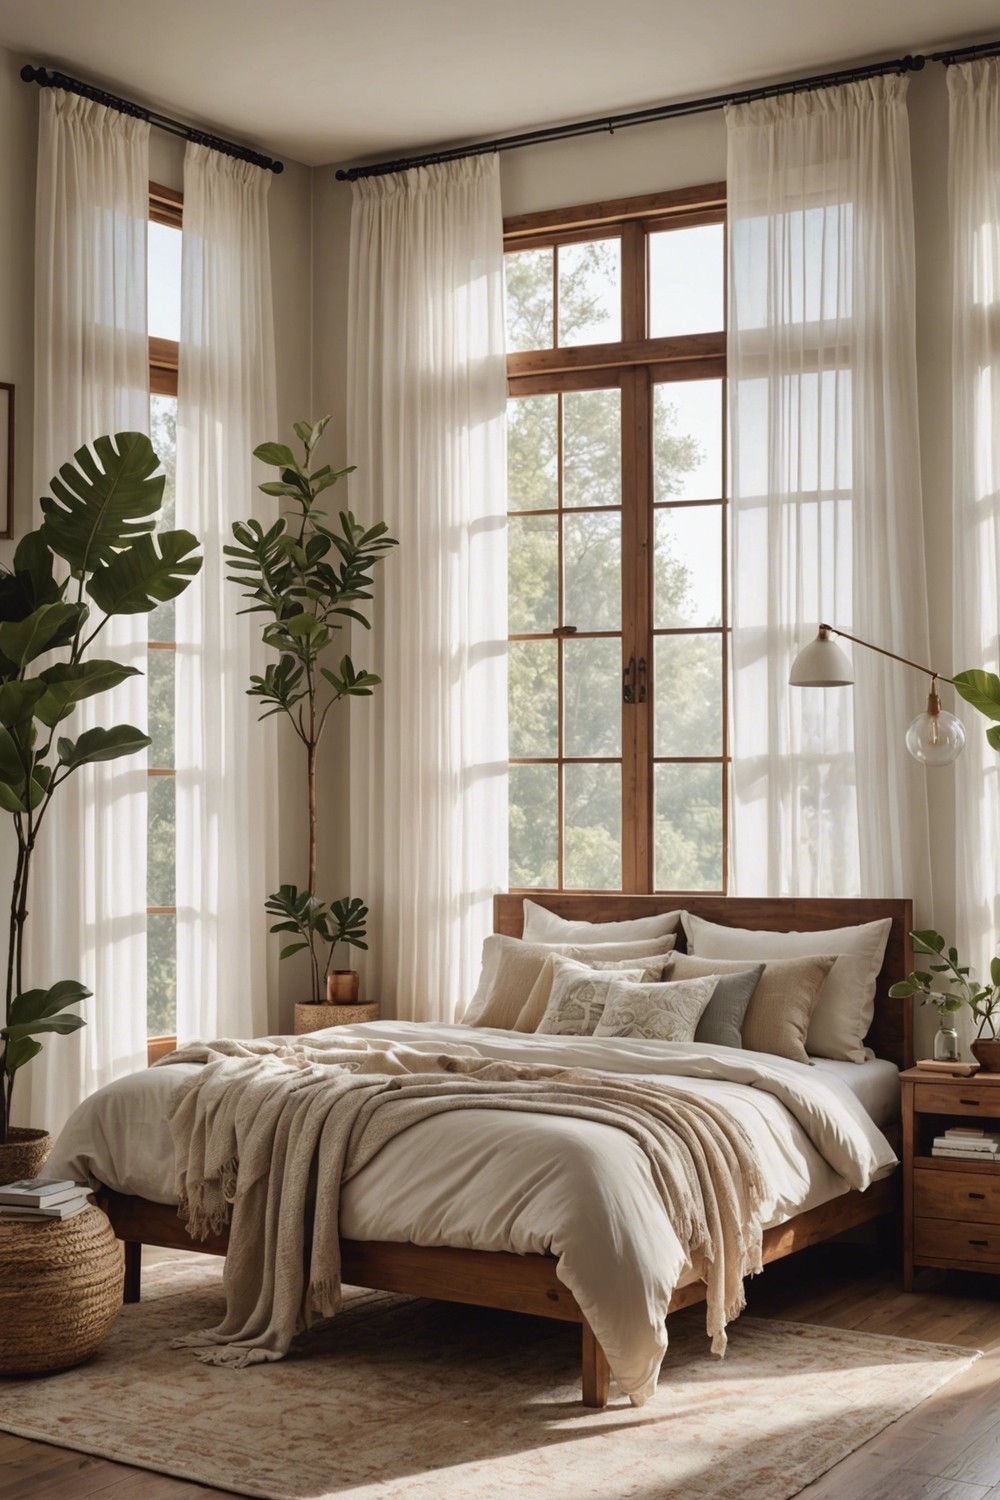 Incorporate Sheer Curtains for Airiness